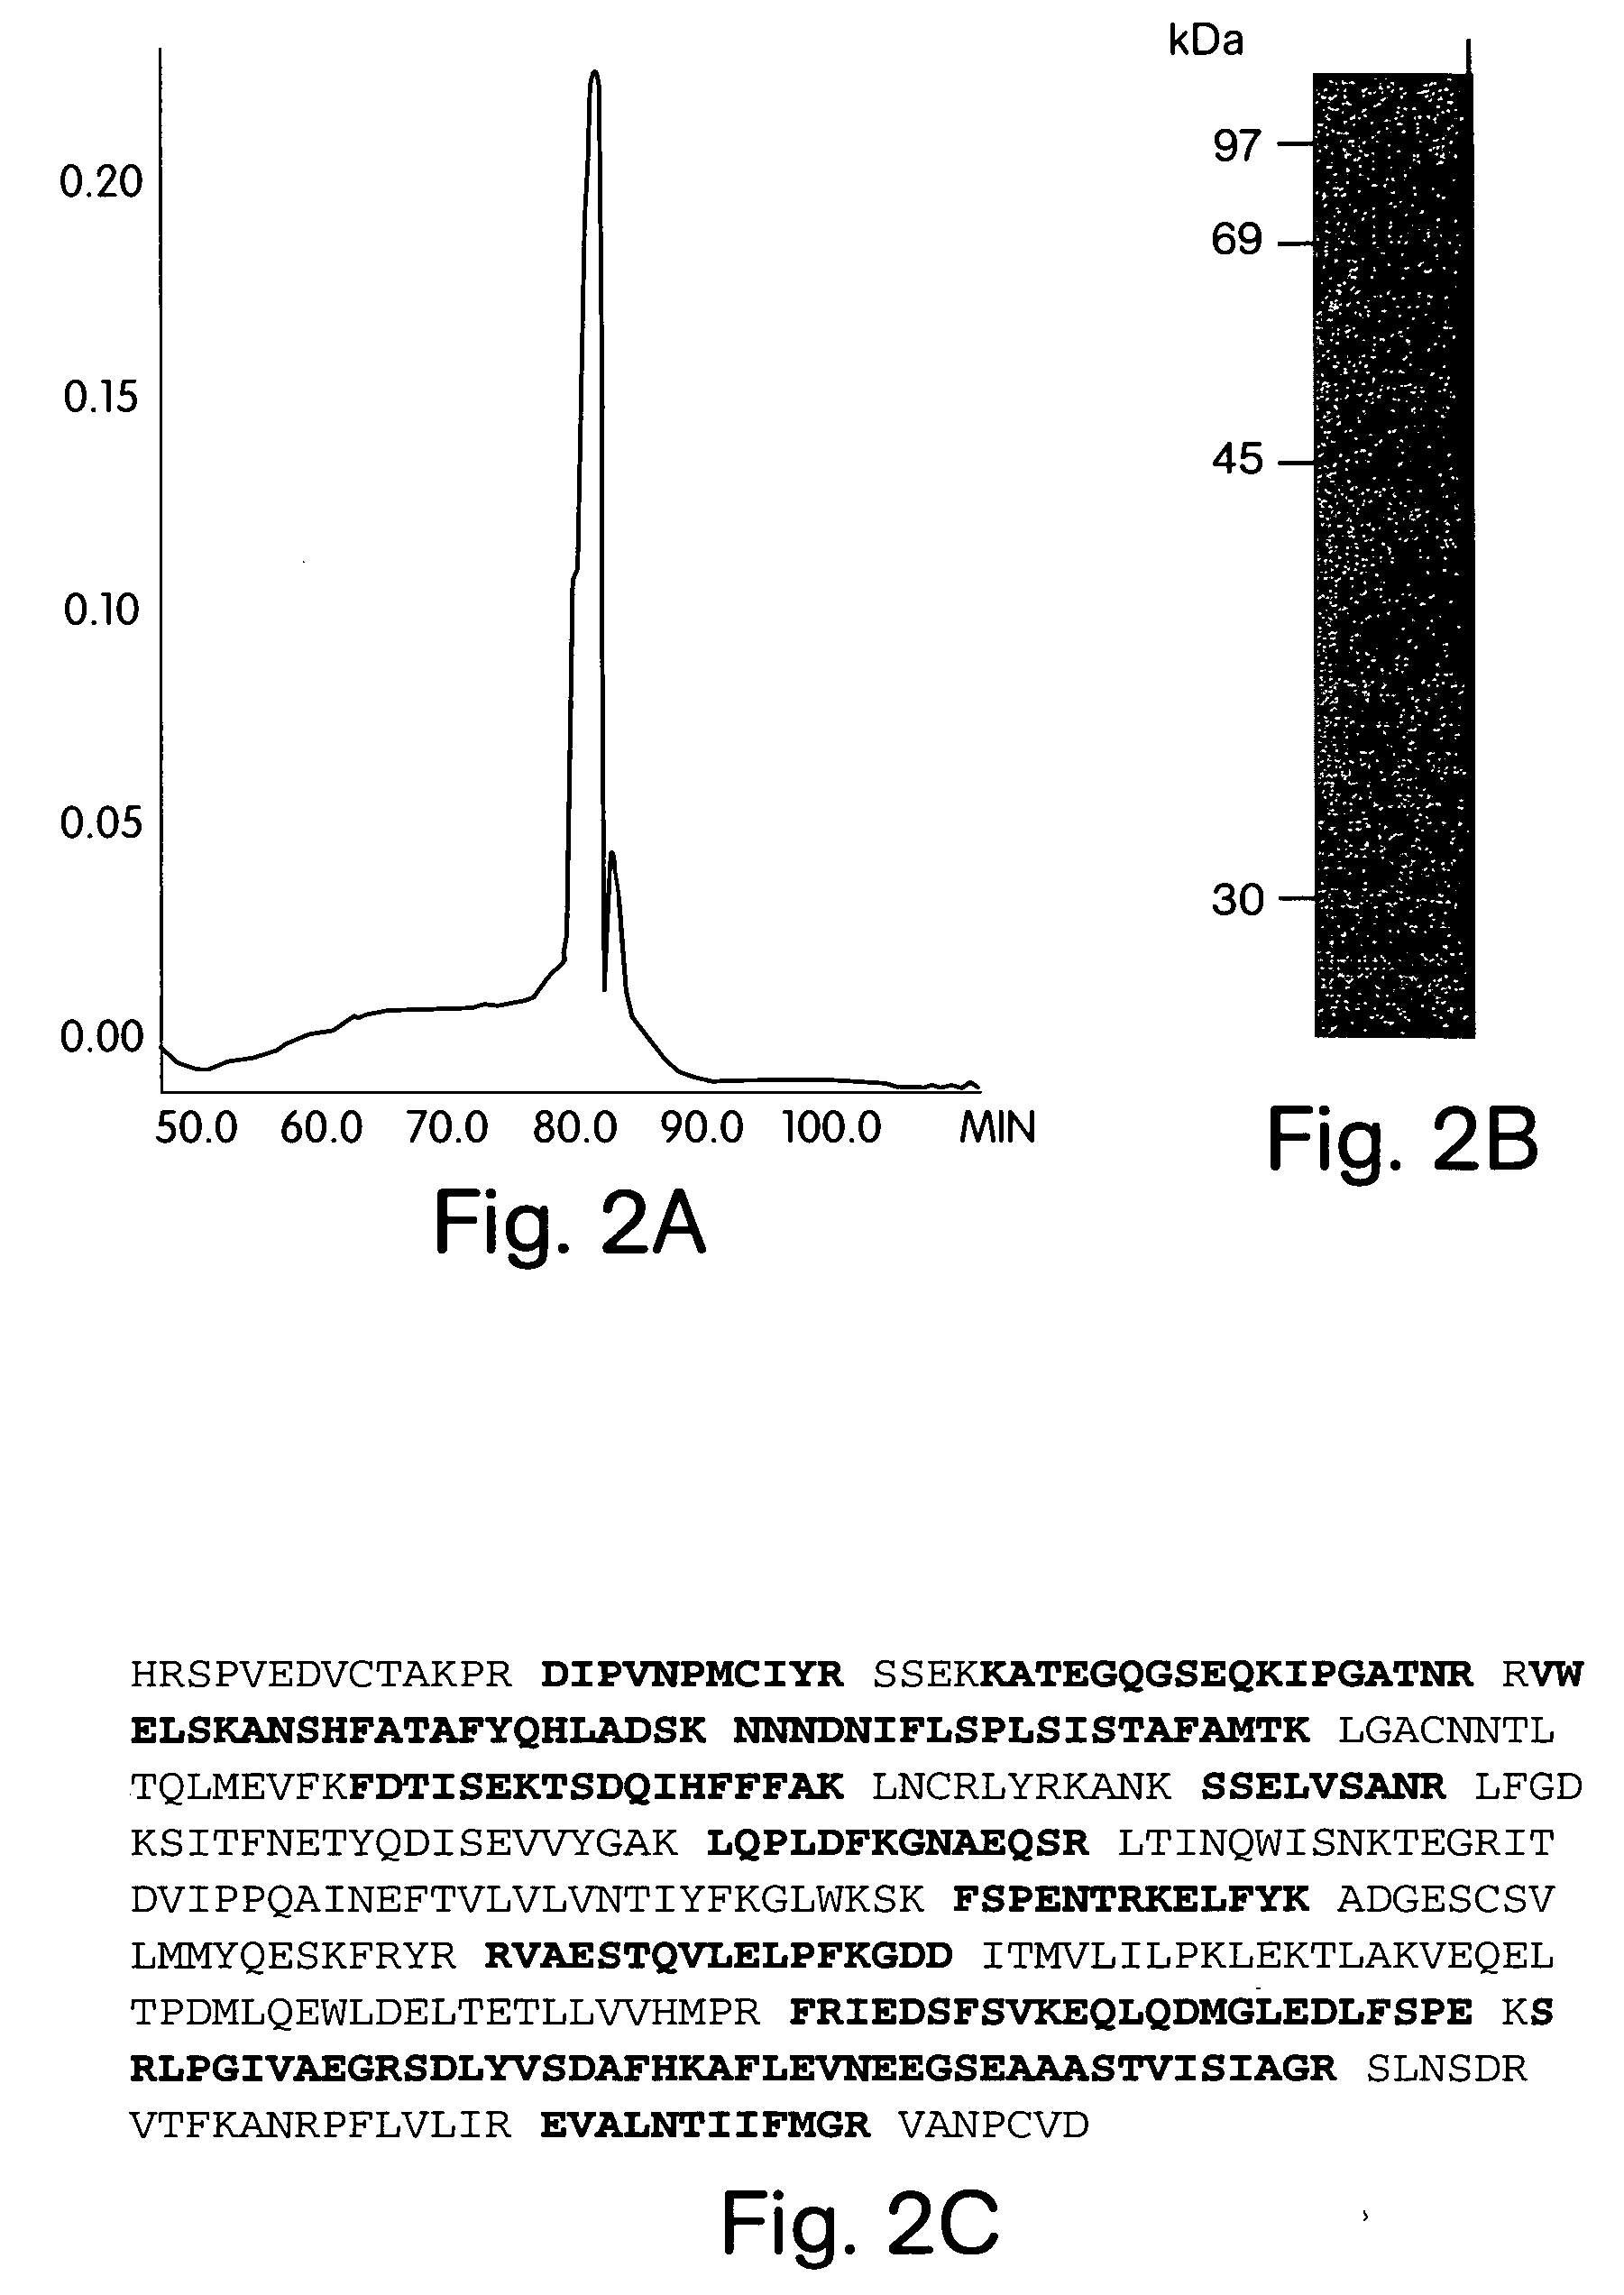 Serpin drugs for treatment of HIV infection and method of use thereof